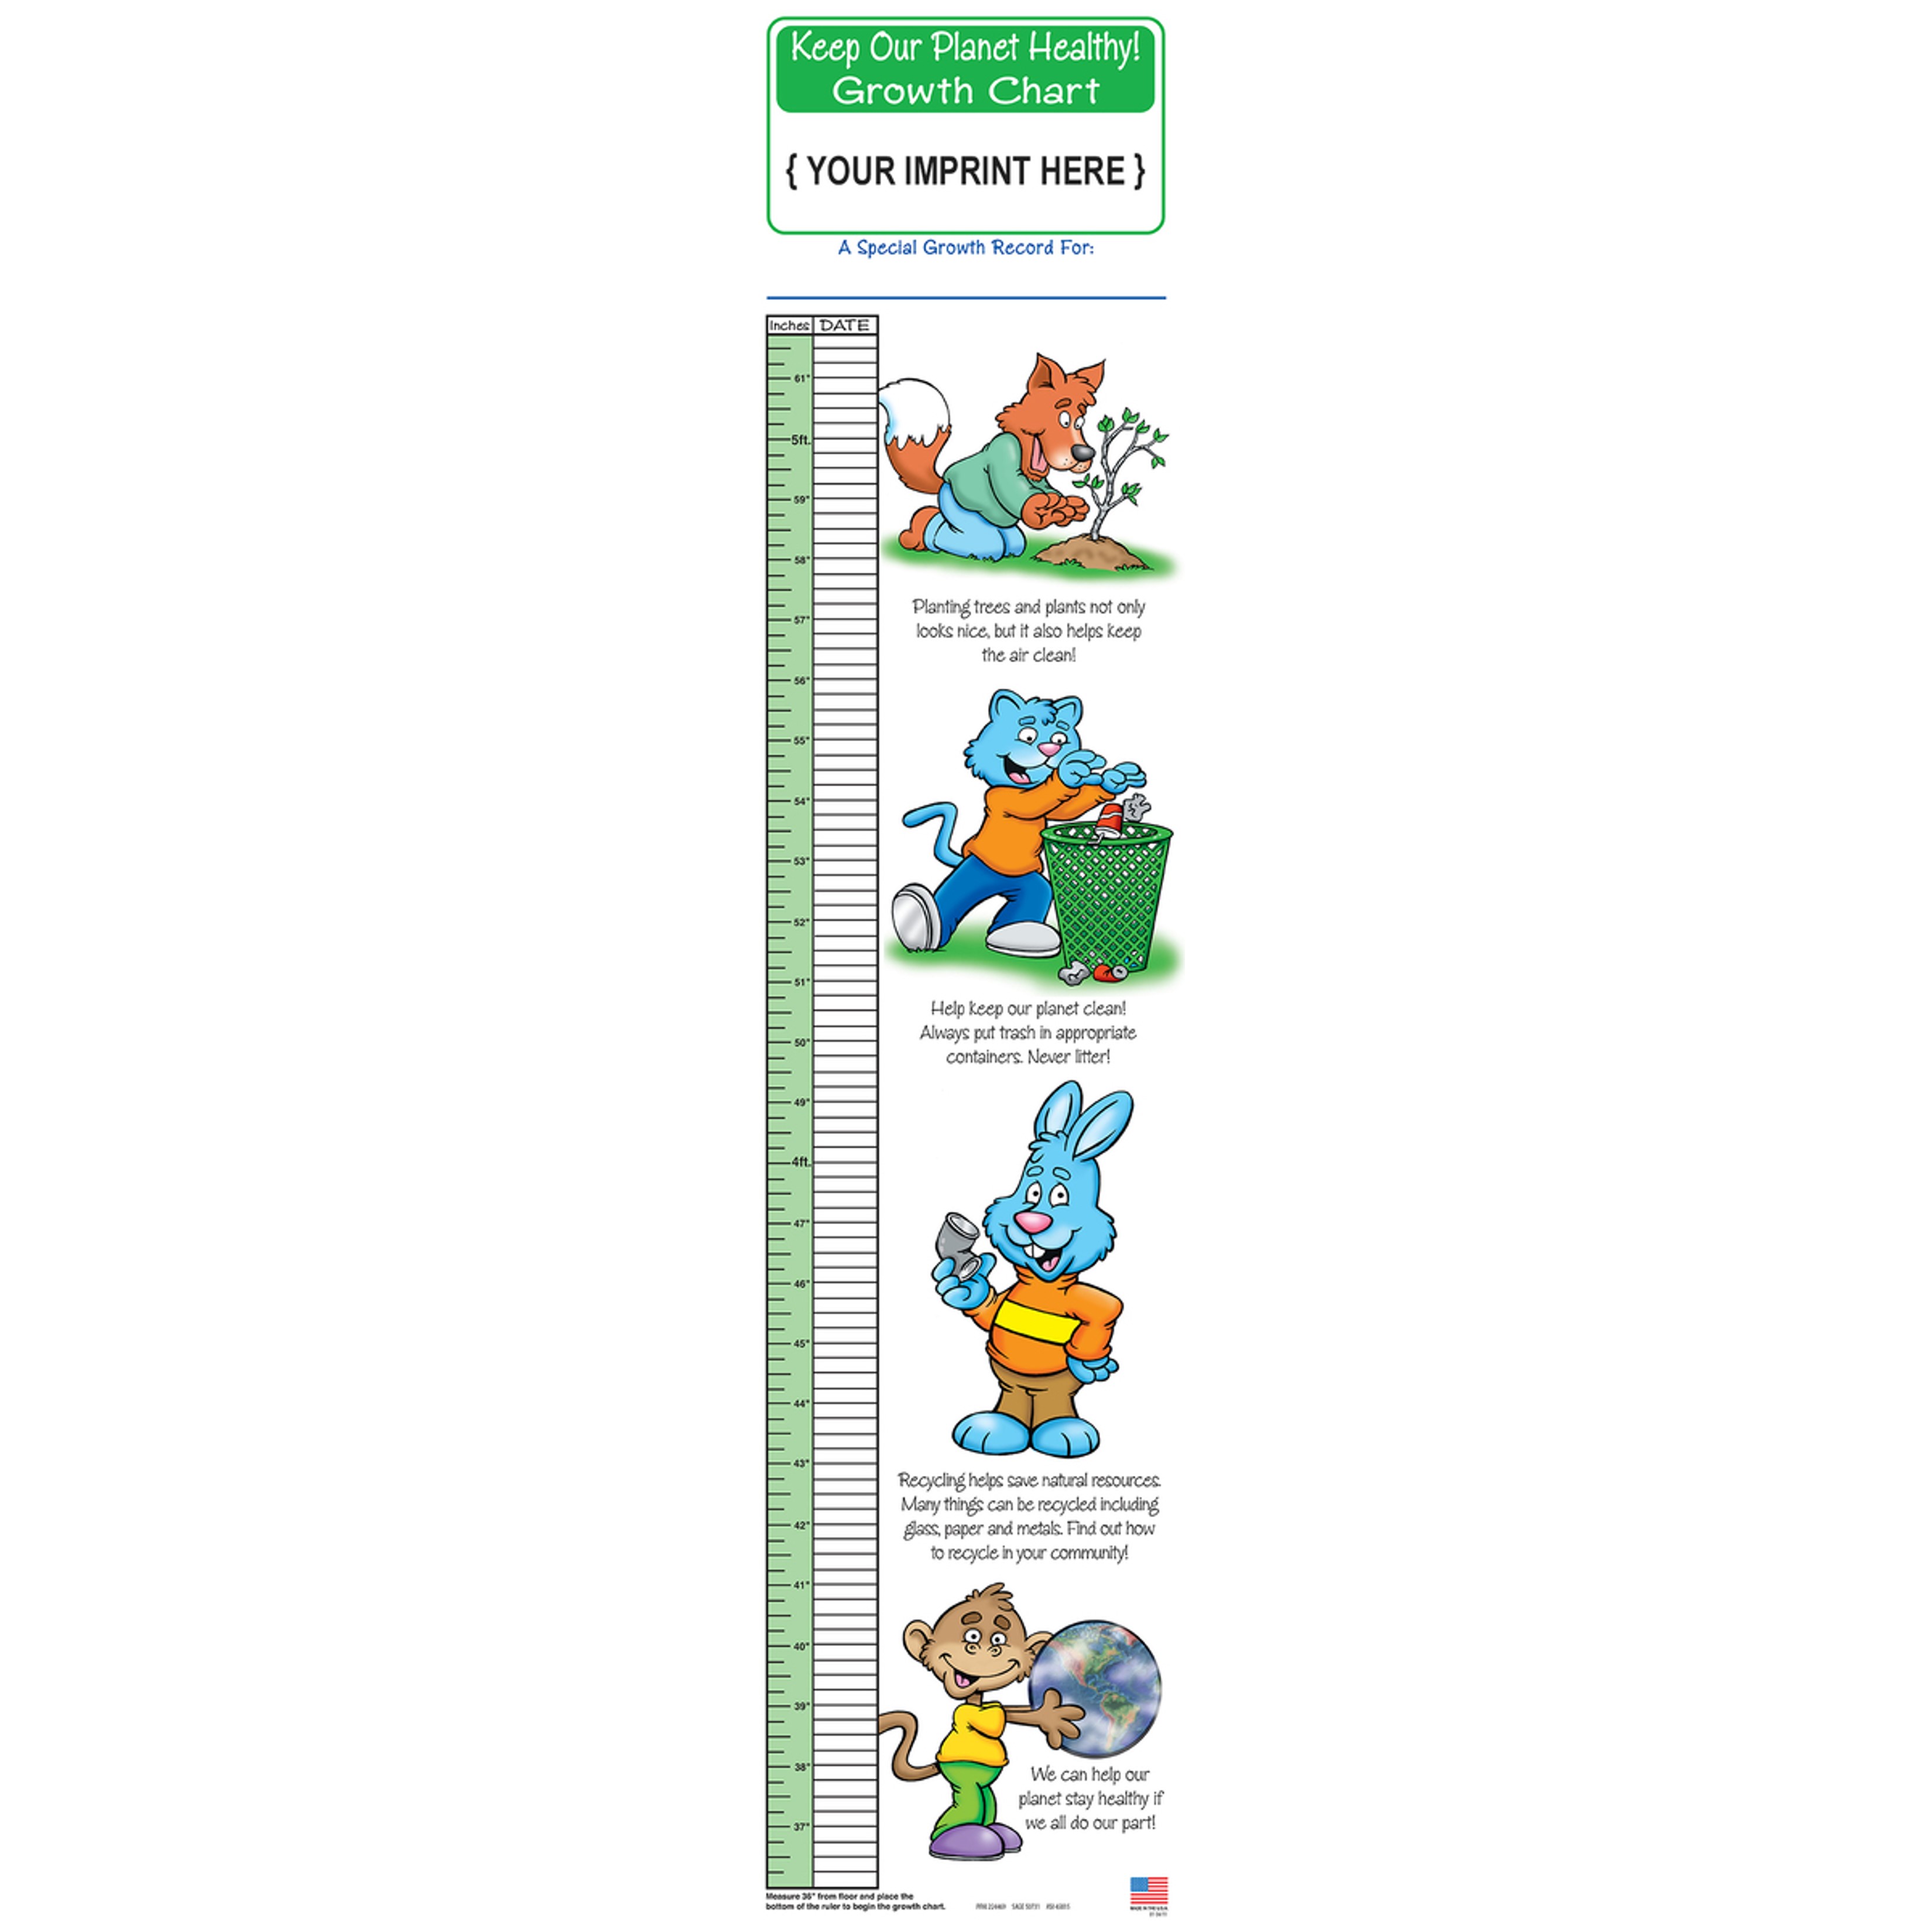 Keep our planet healthy childrens custom logo growth chart